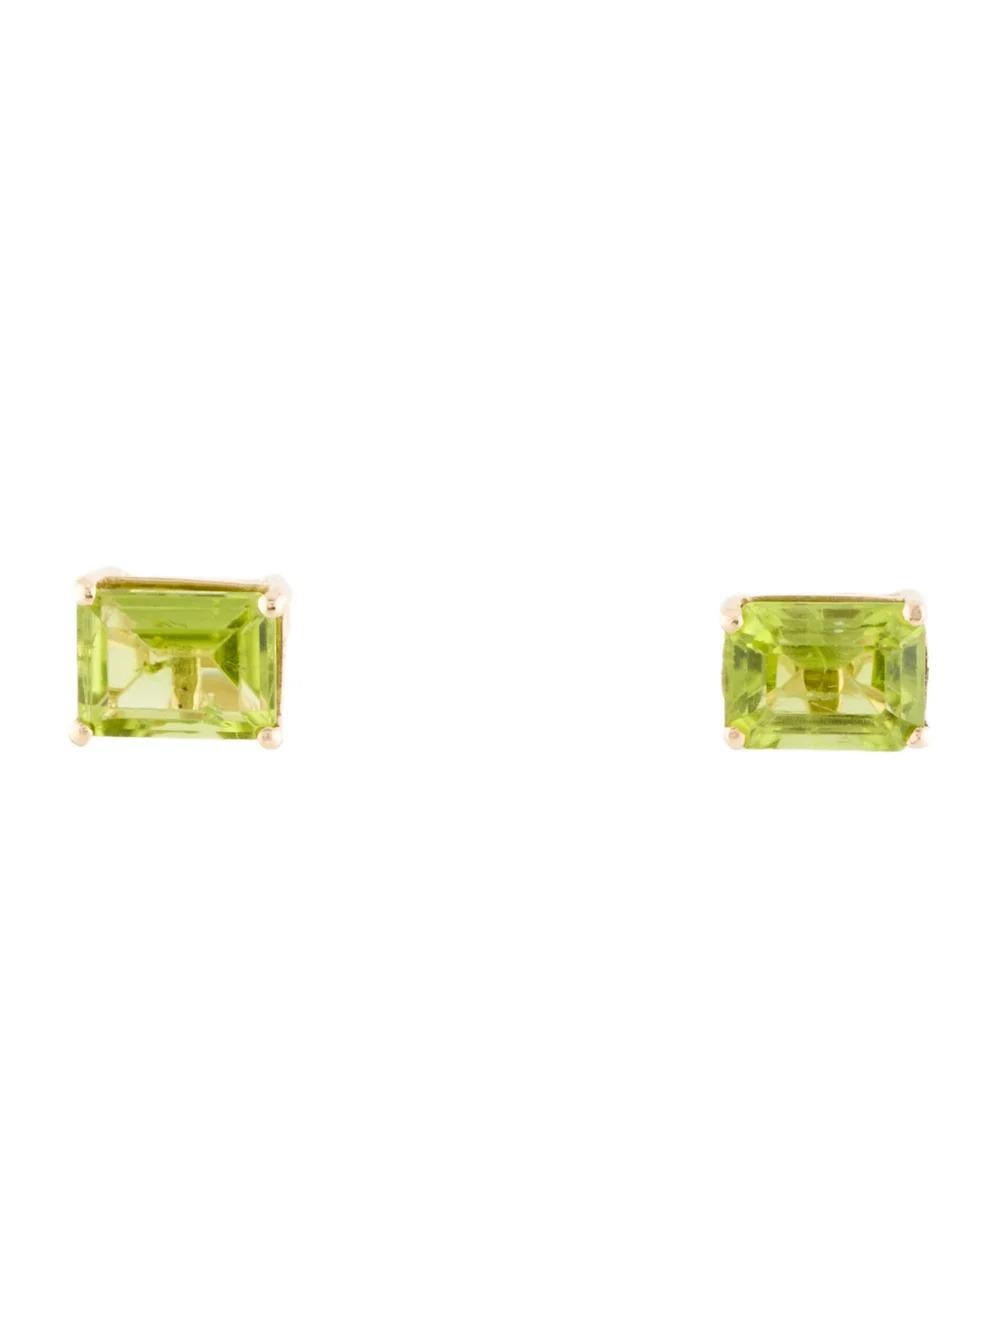 Elevate your style with these exquisite 14K Yellow Gold Peridot Stud Earrings, boasting a stunning 3.74 Carat Emerald Cut Peridot gemstone in each earring. The vibrant green hue of the peridot stones adds a touch of elegance and sophistication to